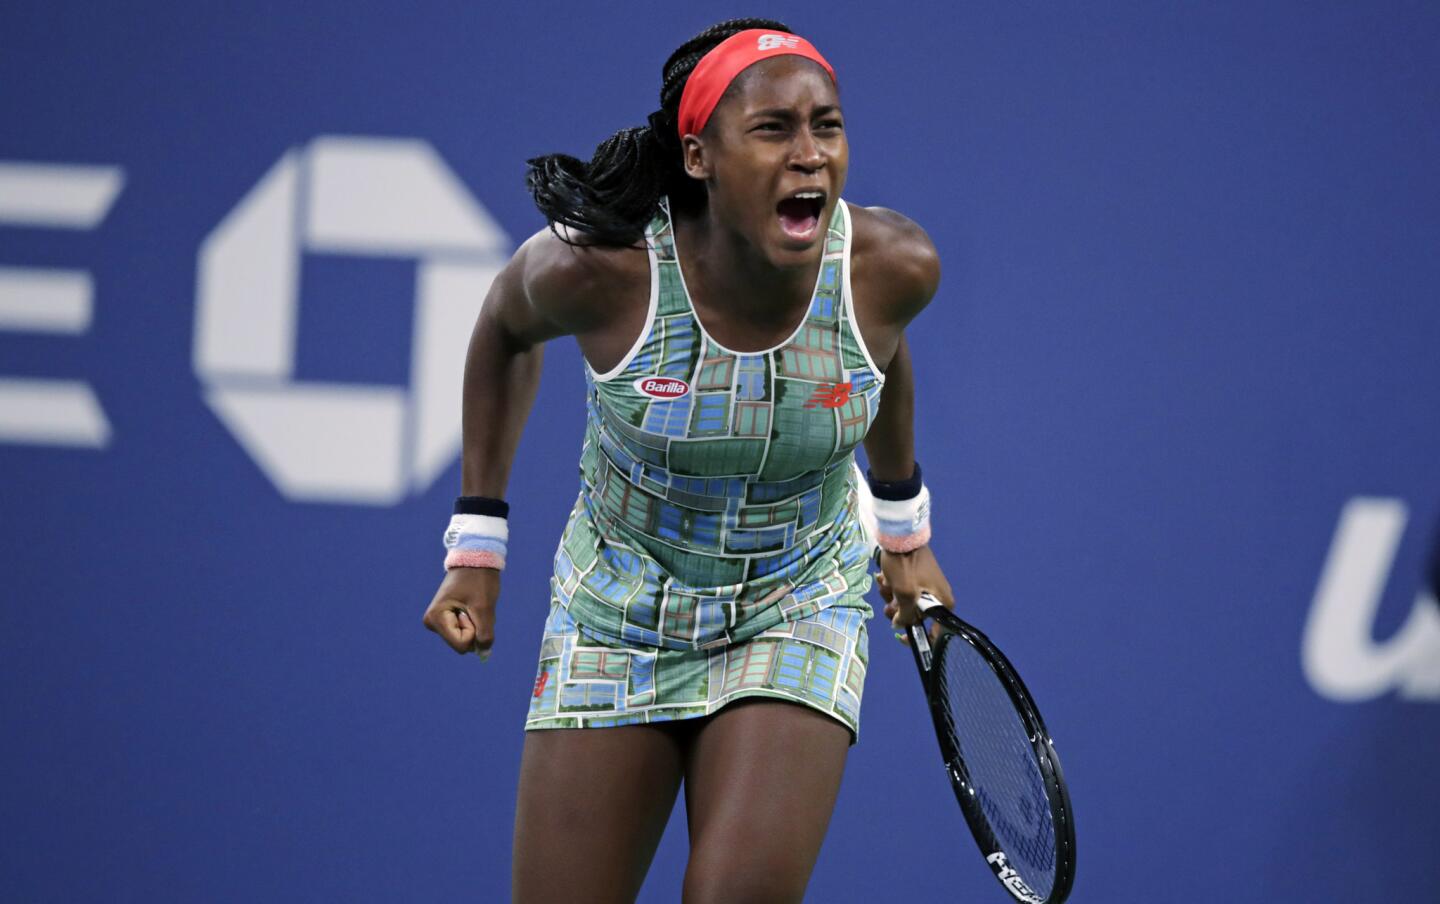 Coco Gauff celebrates after defeating Timea Babos during her Women's Singles second round match on Day 4 of the 2019 U.S. Open at the USTA Billie Jean King National Tennis Center on Aug.29, 2019, in Queens.